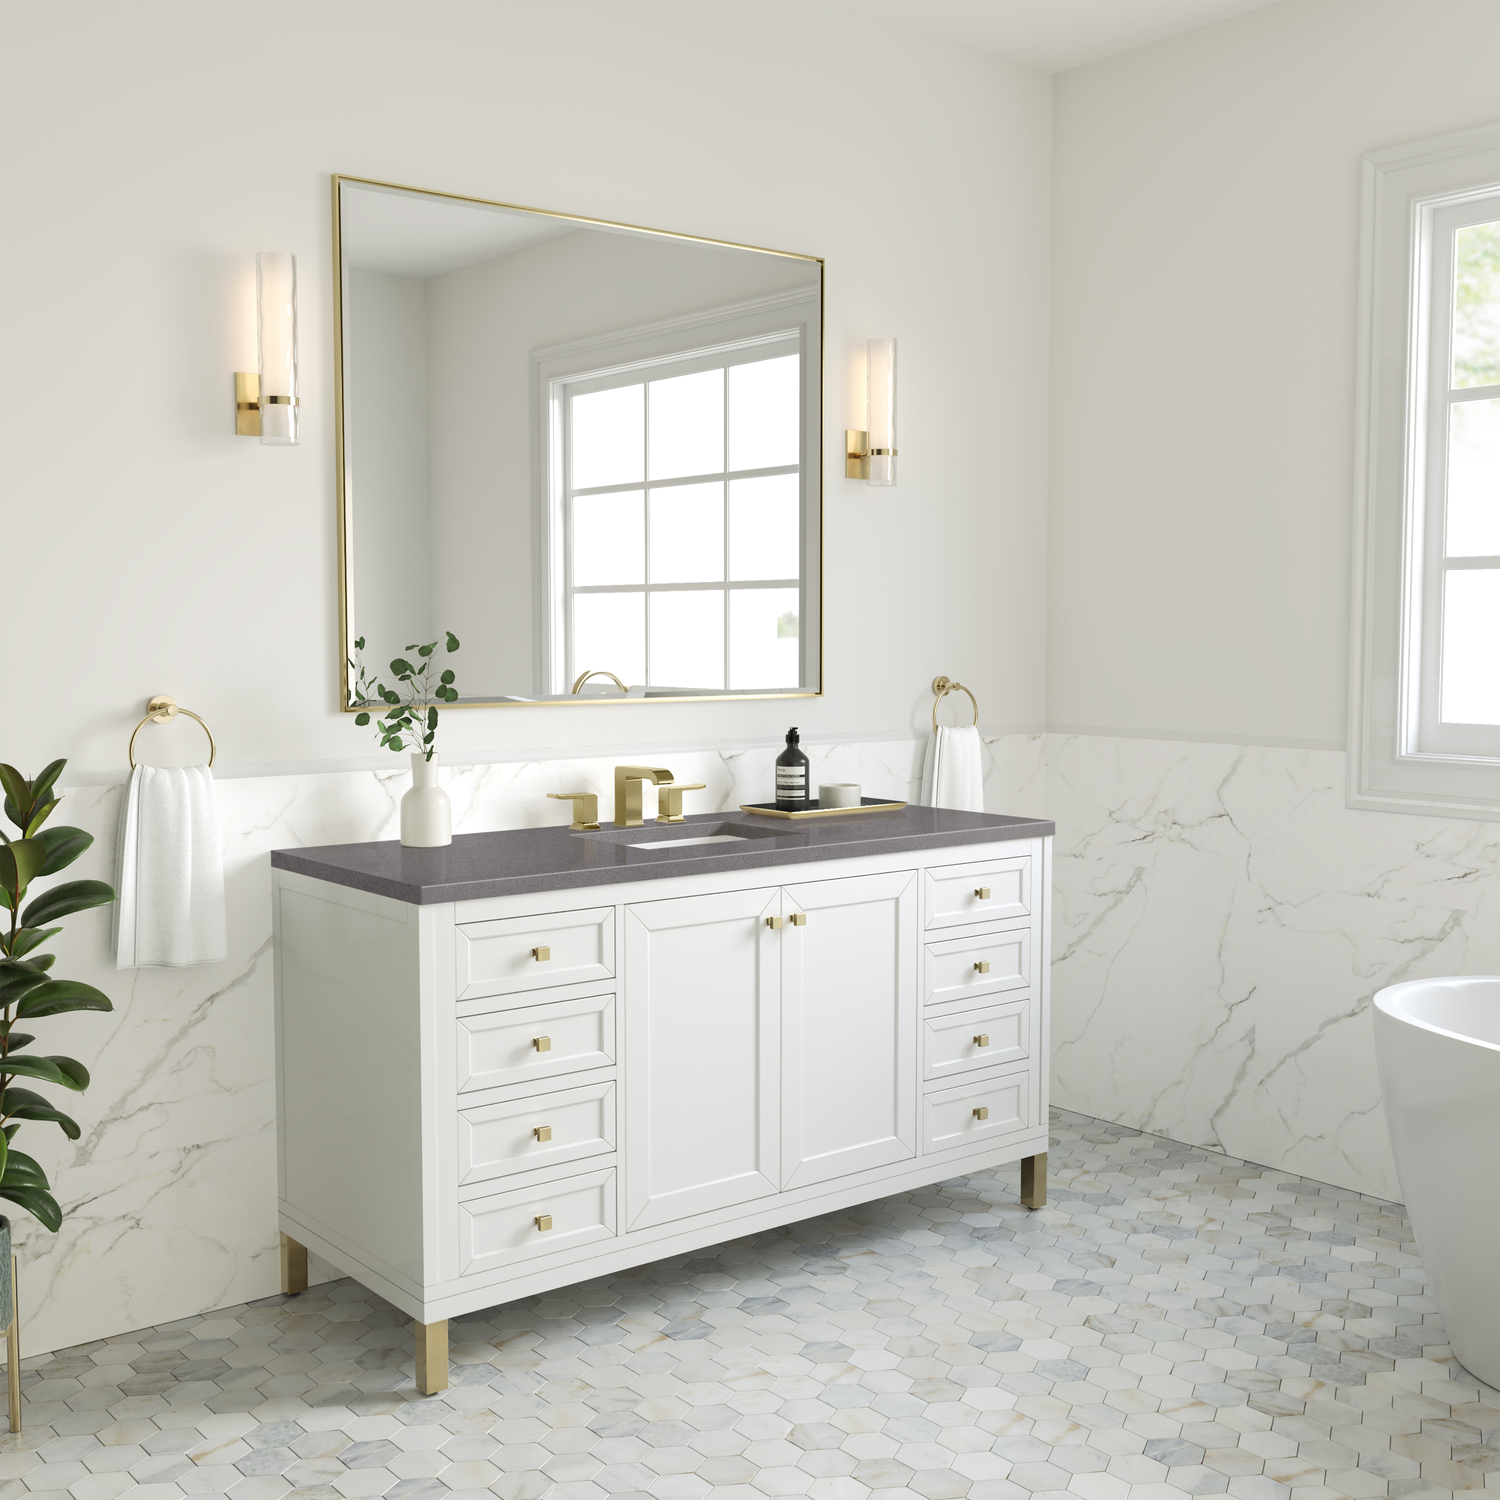 stand over toilet James Martin Vanity Glossy White Modern Farmhouse, Transitional